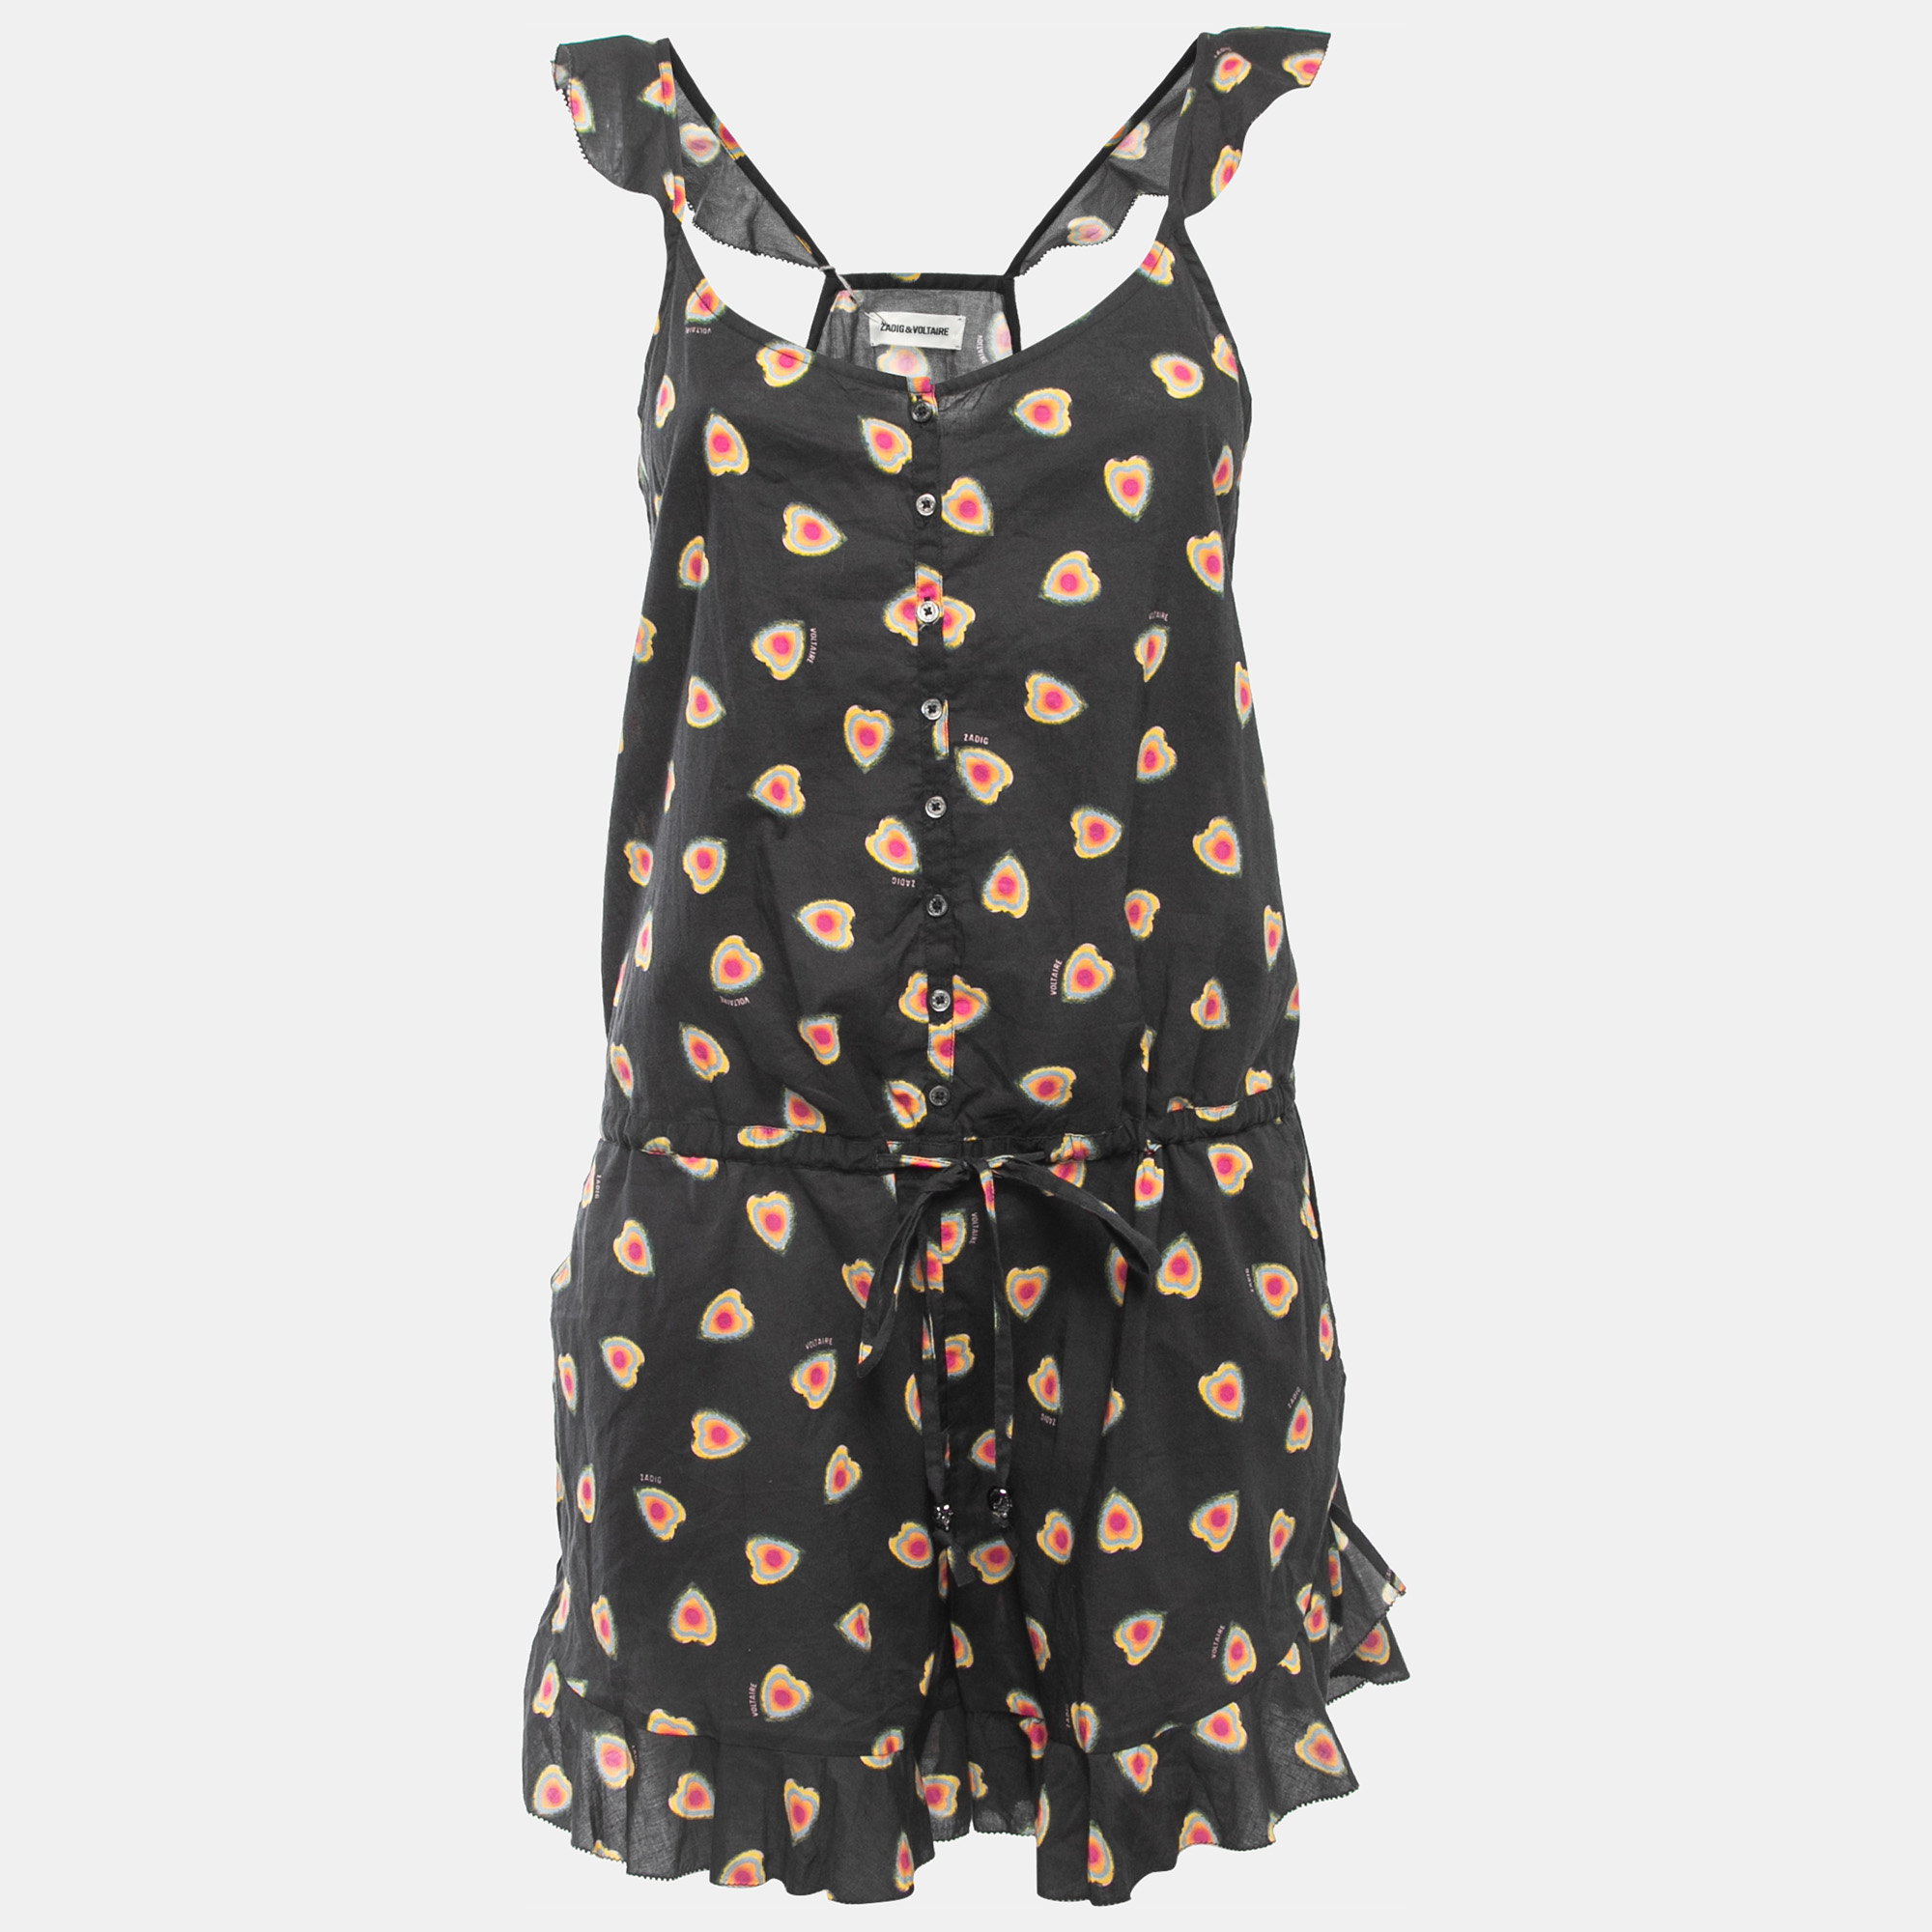 Zadig & Voltaire Black All-Over Hearts Print Sleeveless Playsuit M